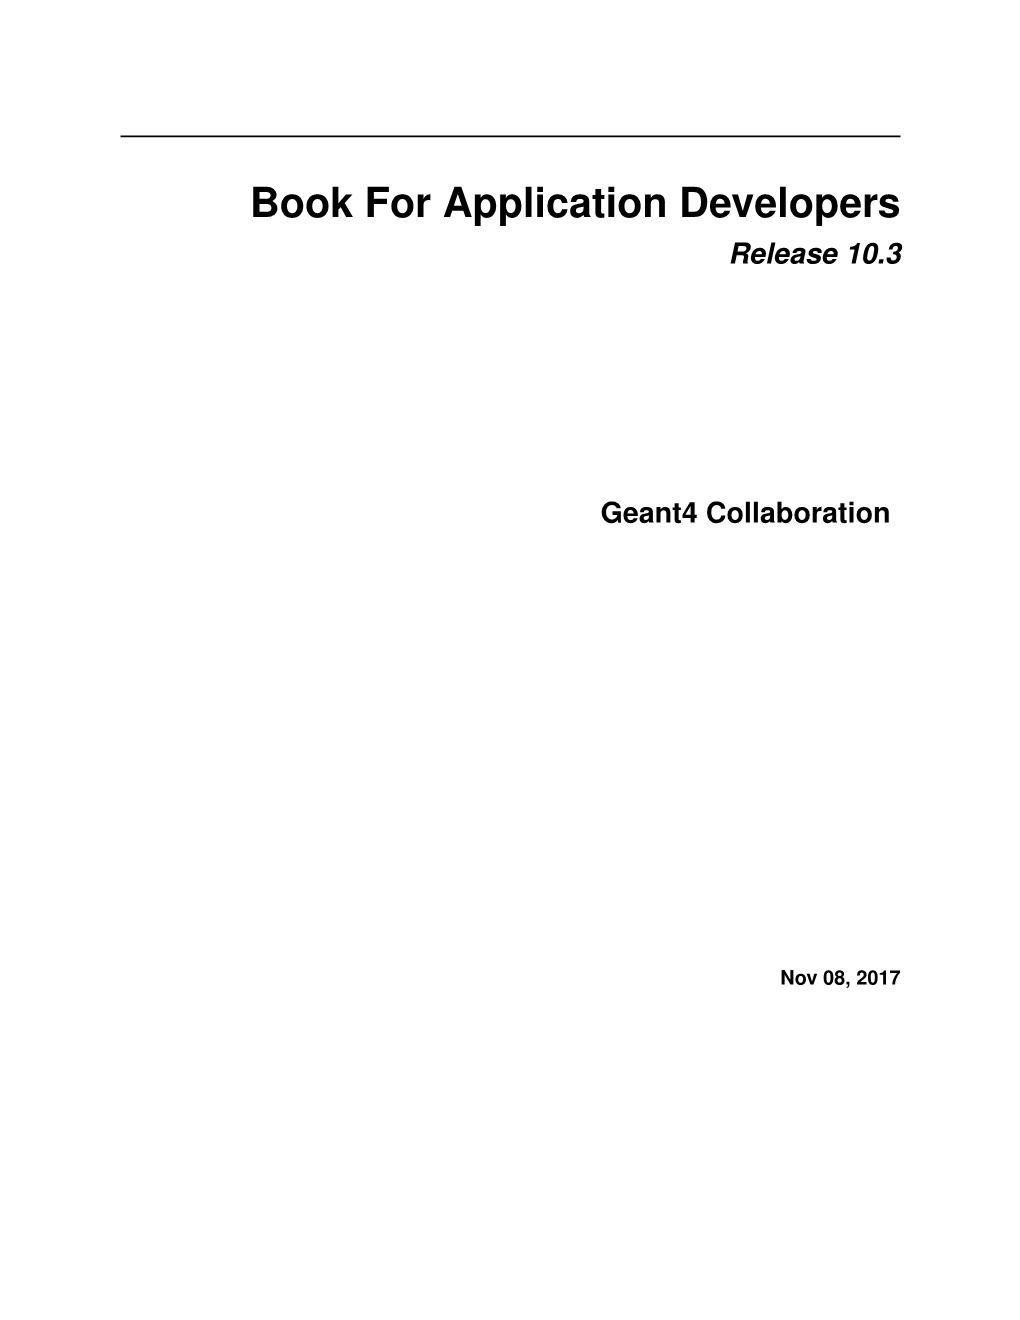 Book for Application Developers Release 10.3